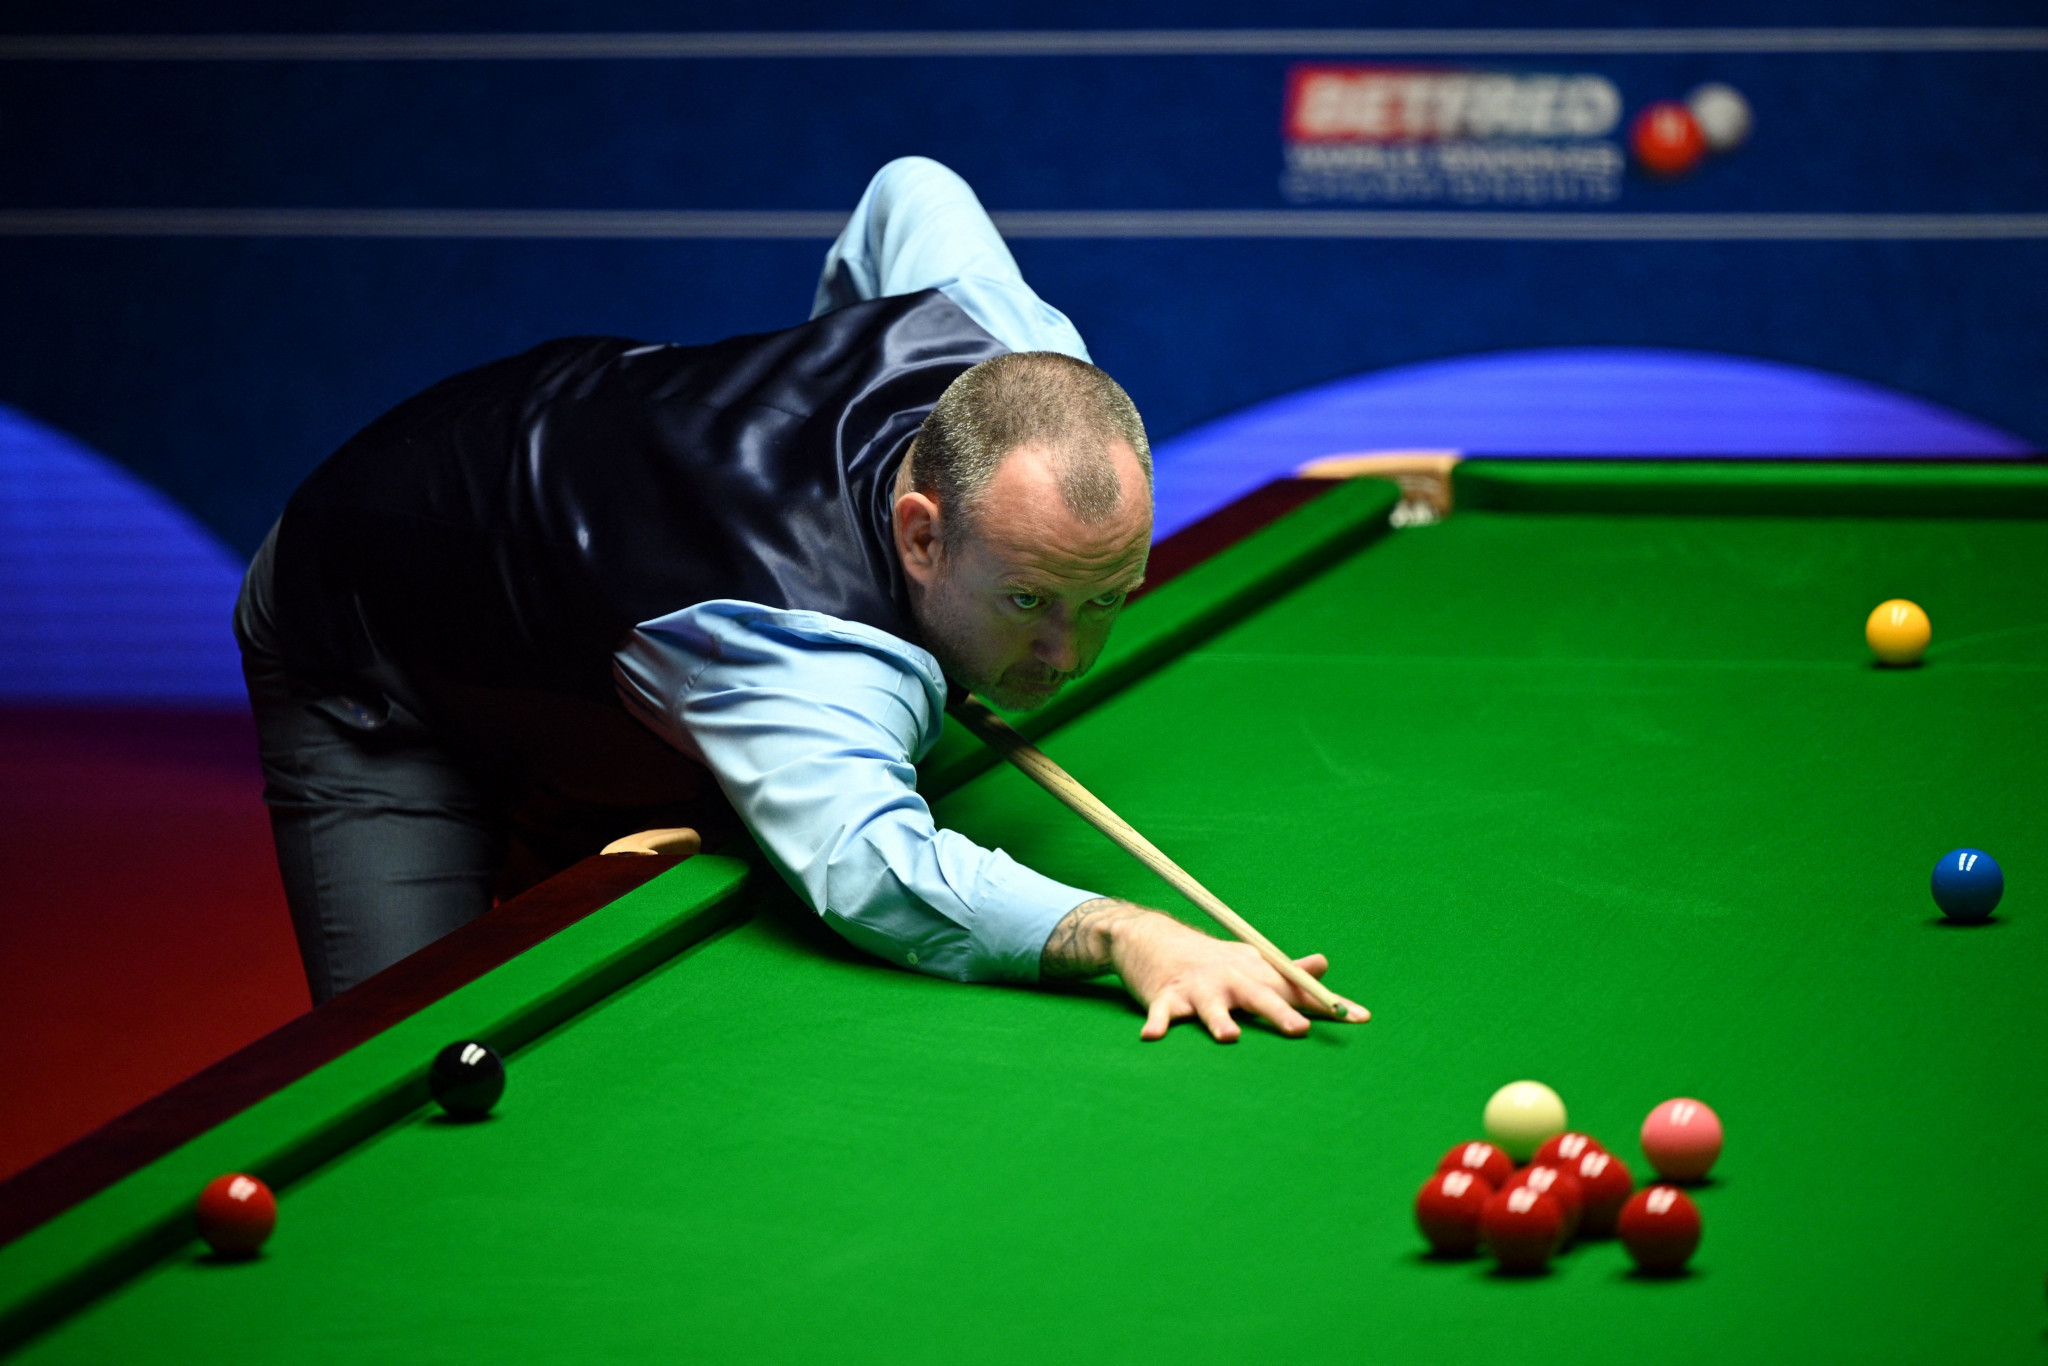 Williams in quarter-finals as pigeon steals the show at World Snooker Championship